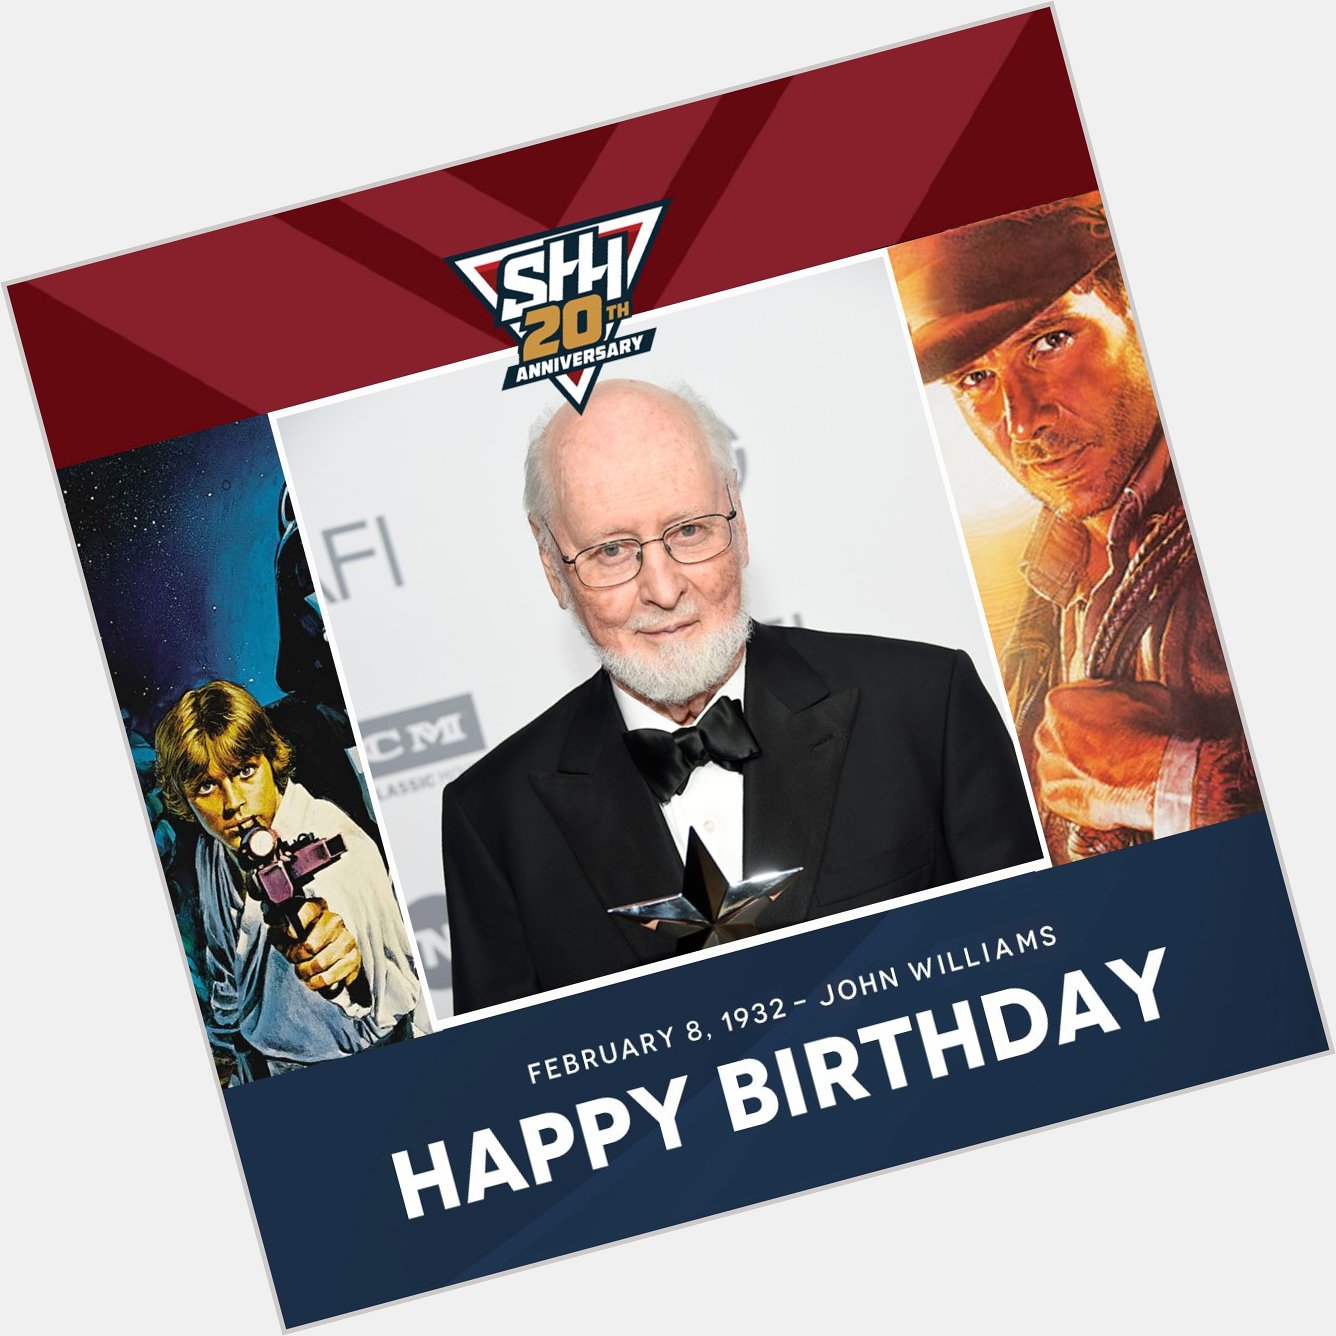 Happy Birthday to one of the great film composers of all-time, John Williams! 